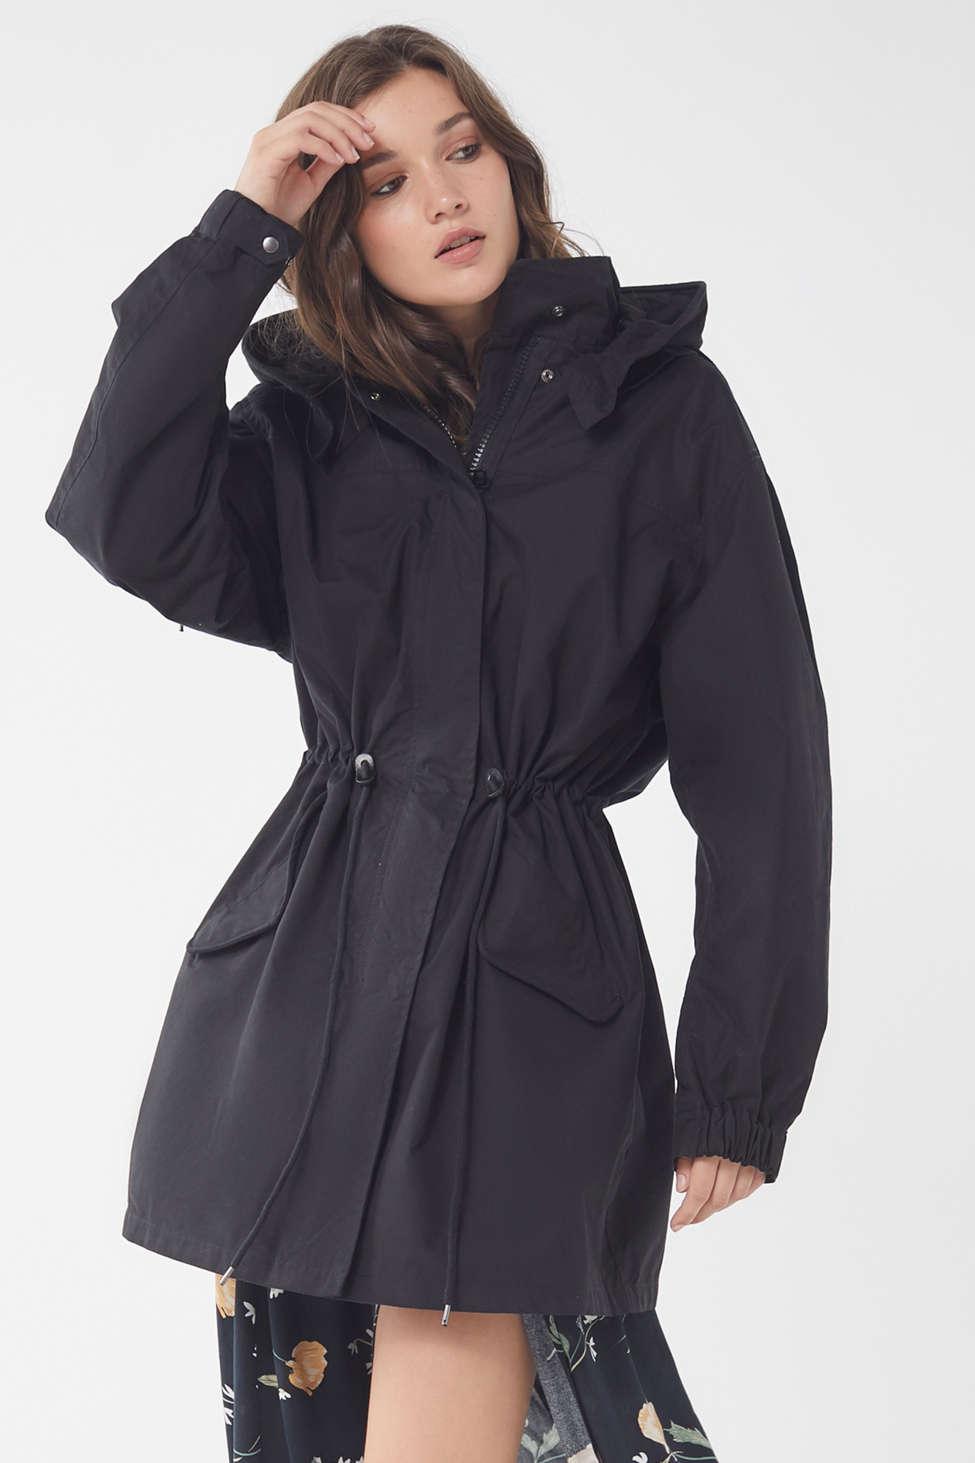 Urban Outfitters Uo Hooded Longline Parka Coat in Black - Lyst